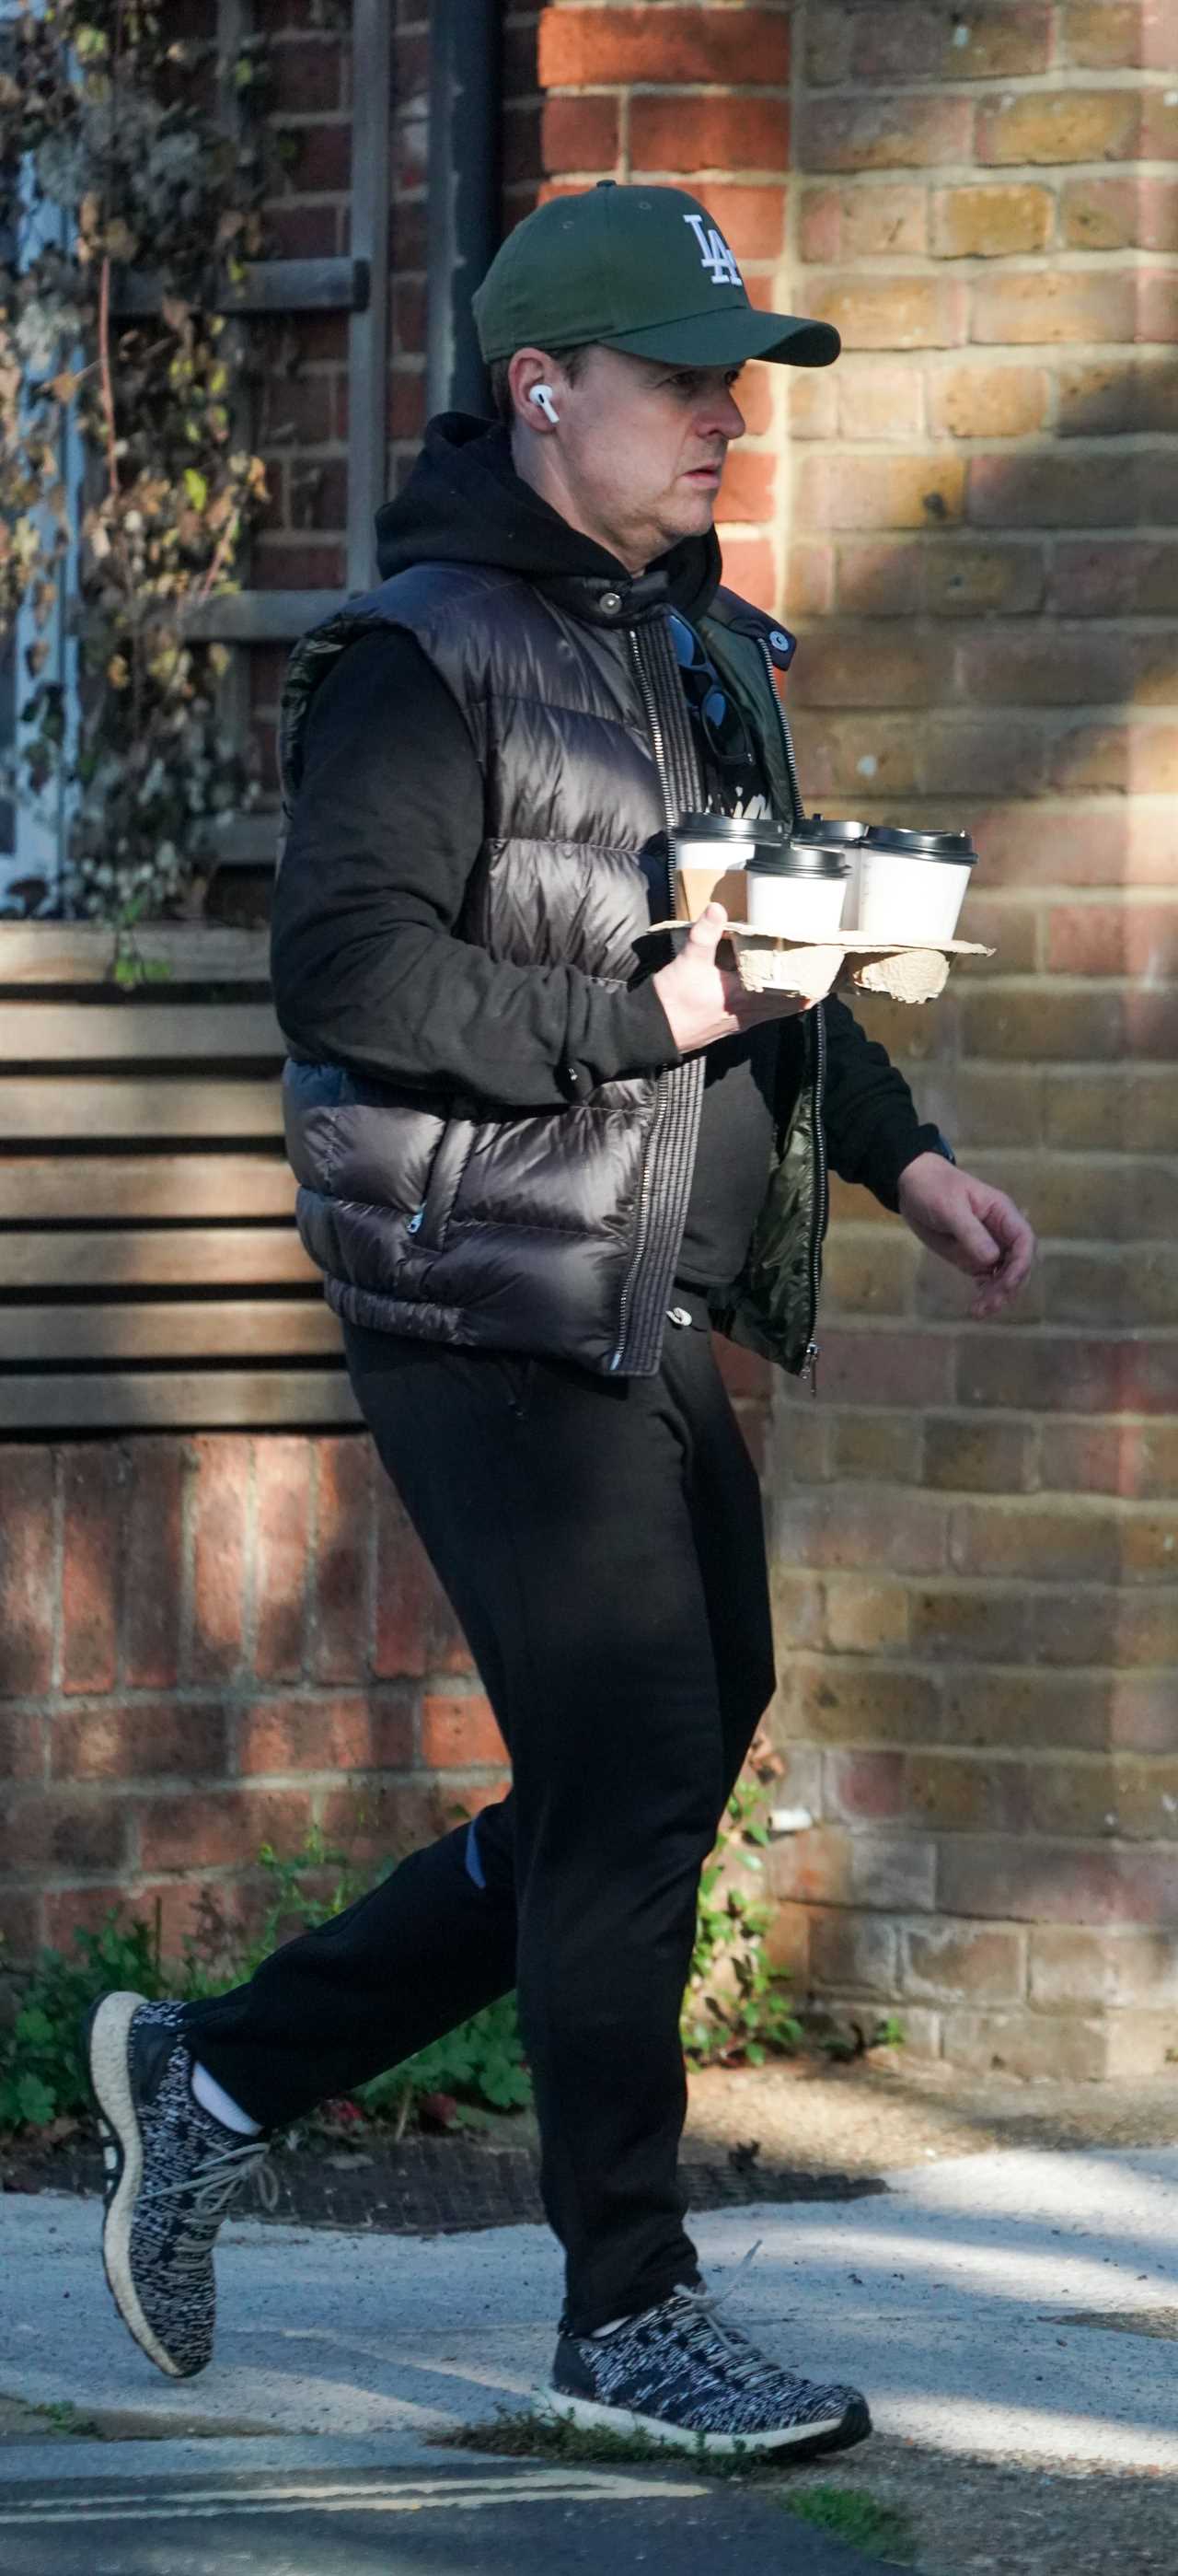 Dec Donnolly spotted for the first since catching Covid with wife Ali as she cradles baby son Jack